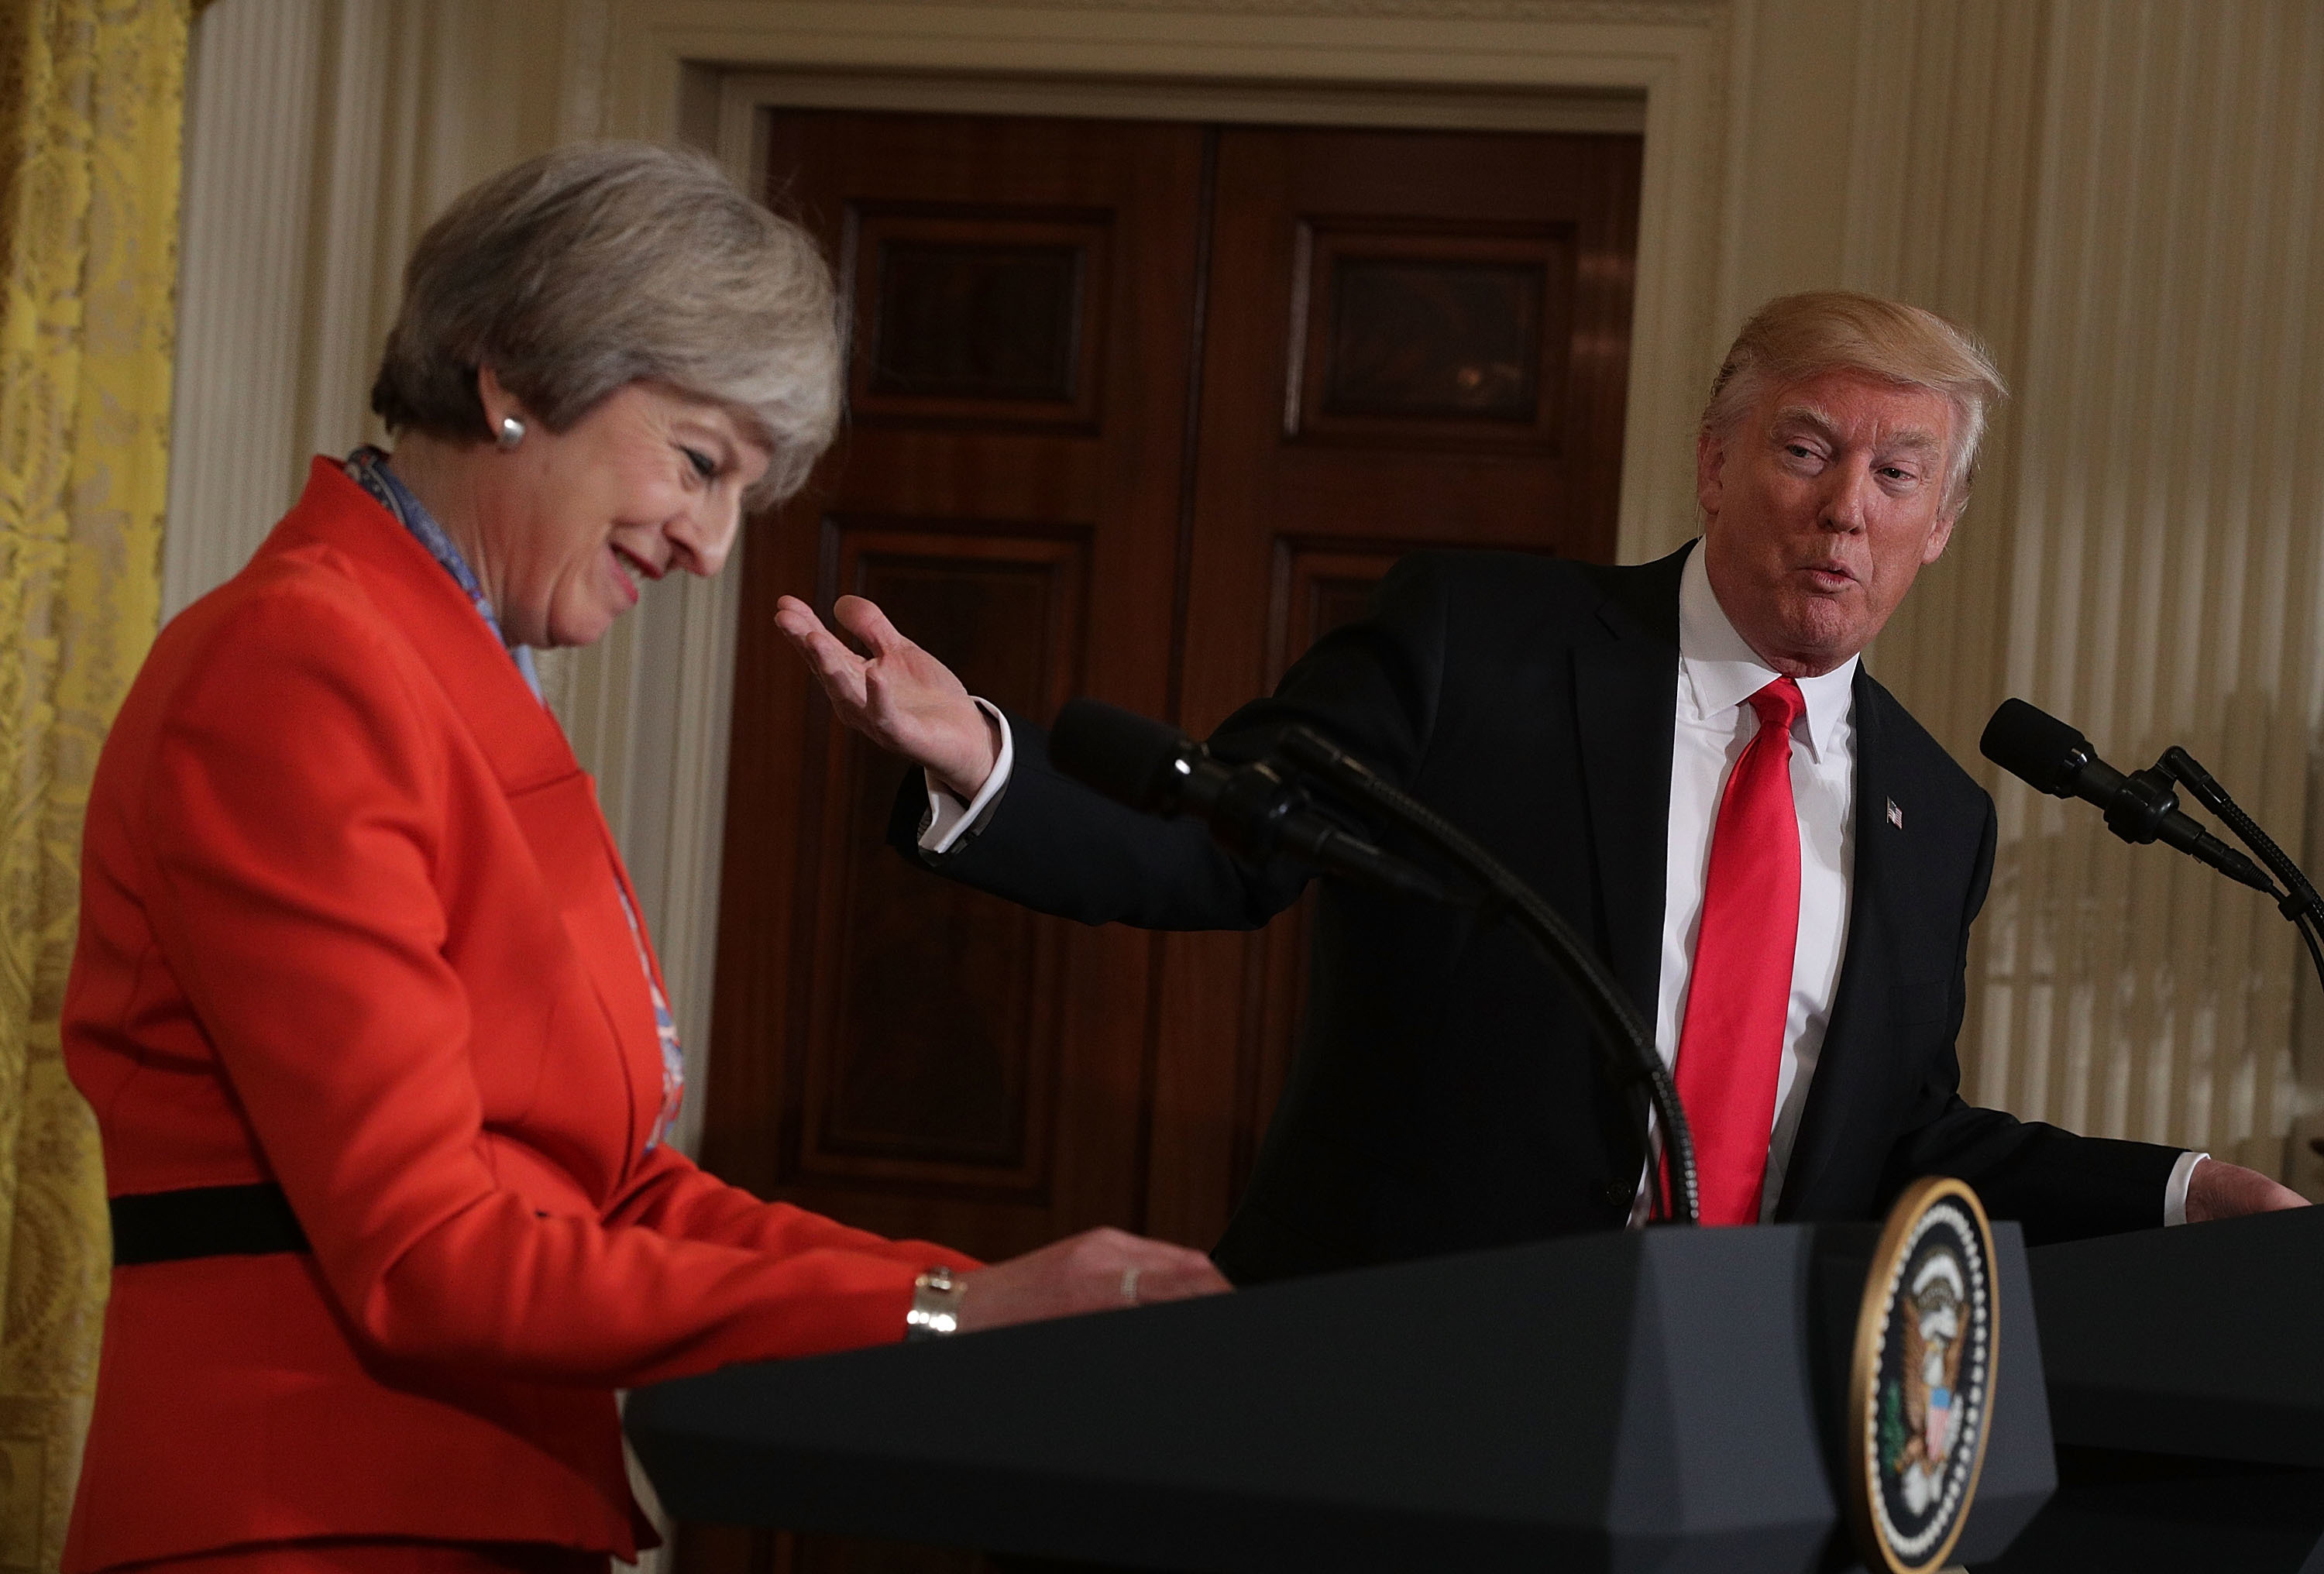 U.S. President Donald Trump (R) and British Prime Minister Theresa May (L) participate in a joint press conference (Alex Wong/Getty Images)